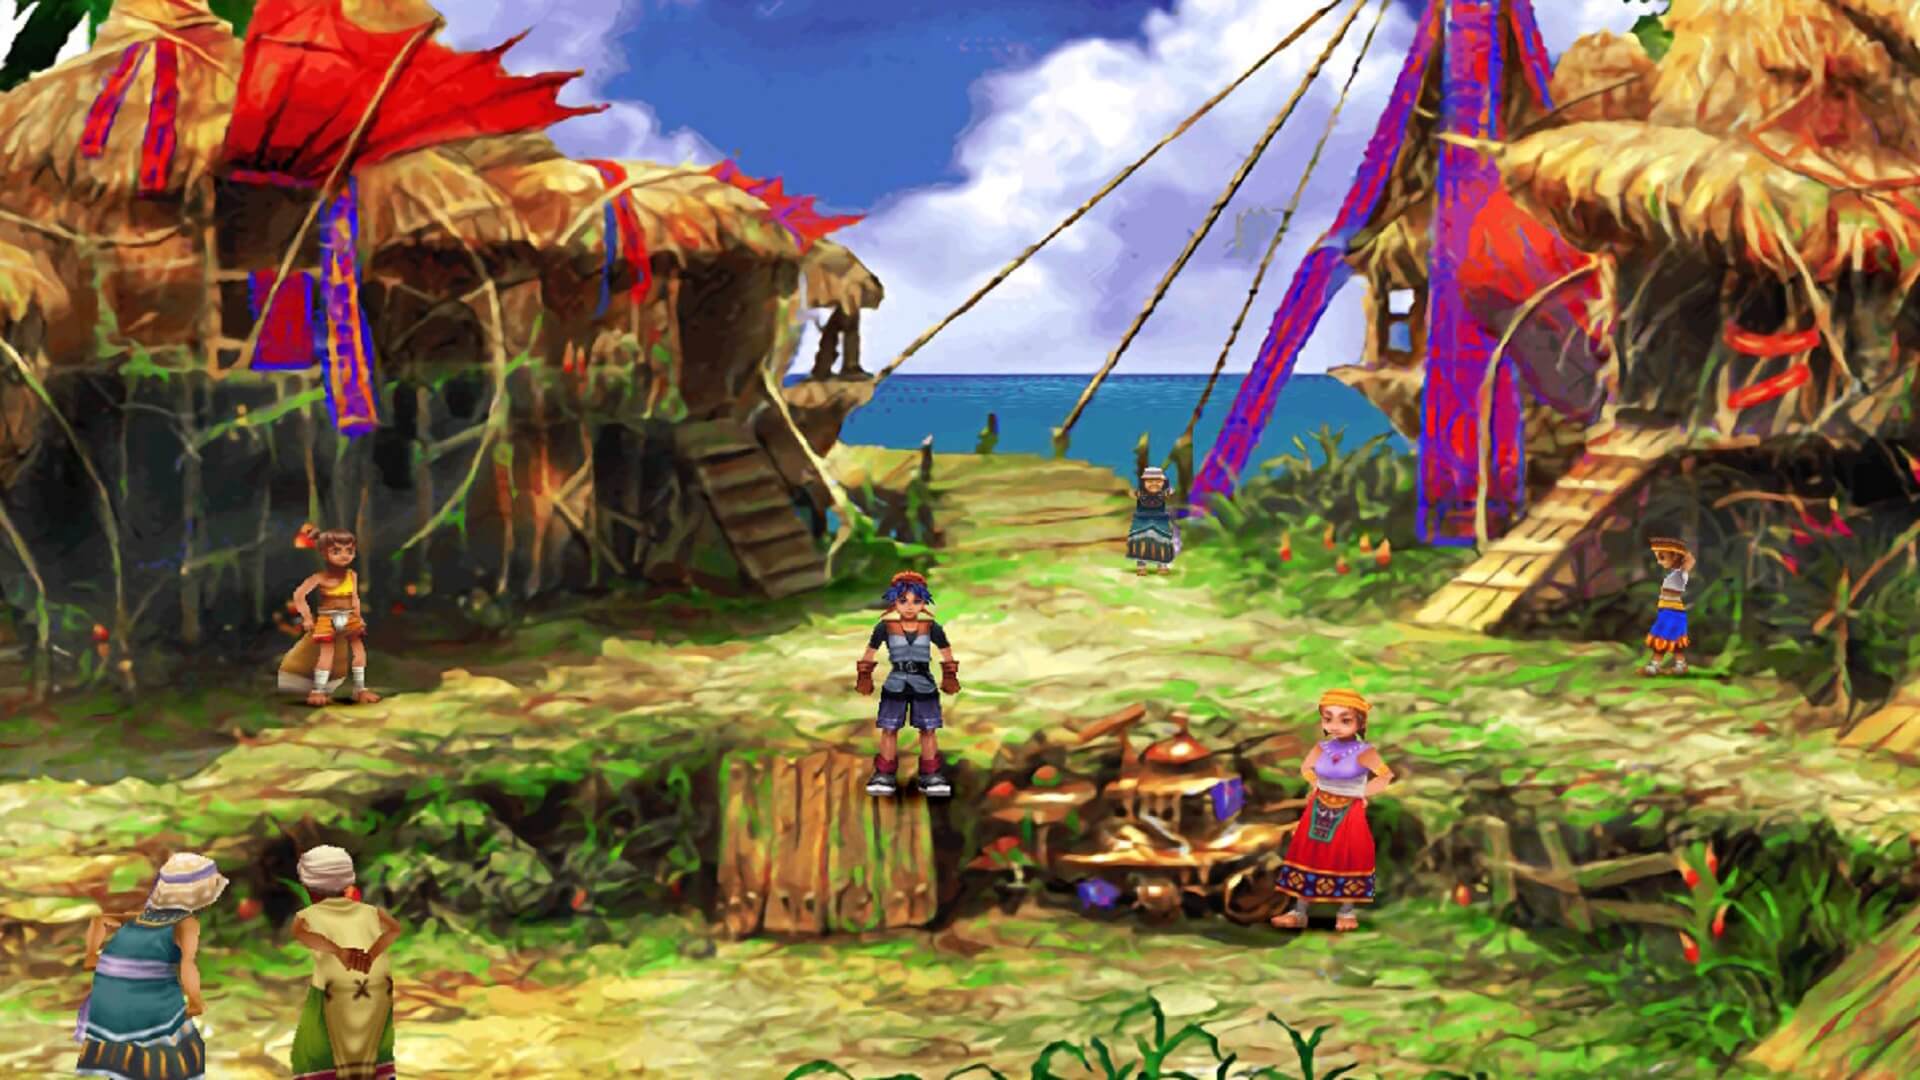 While set in the same "Chrono" world, Chrono Cross is still not a sequel.